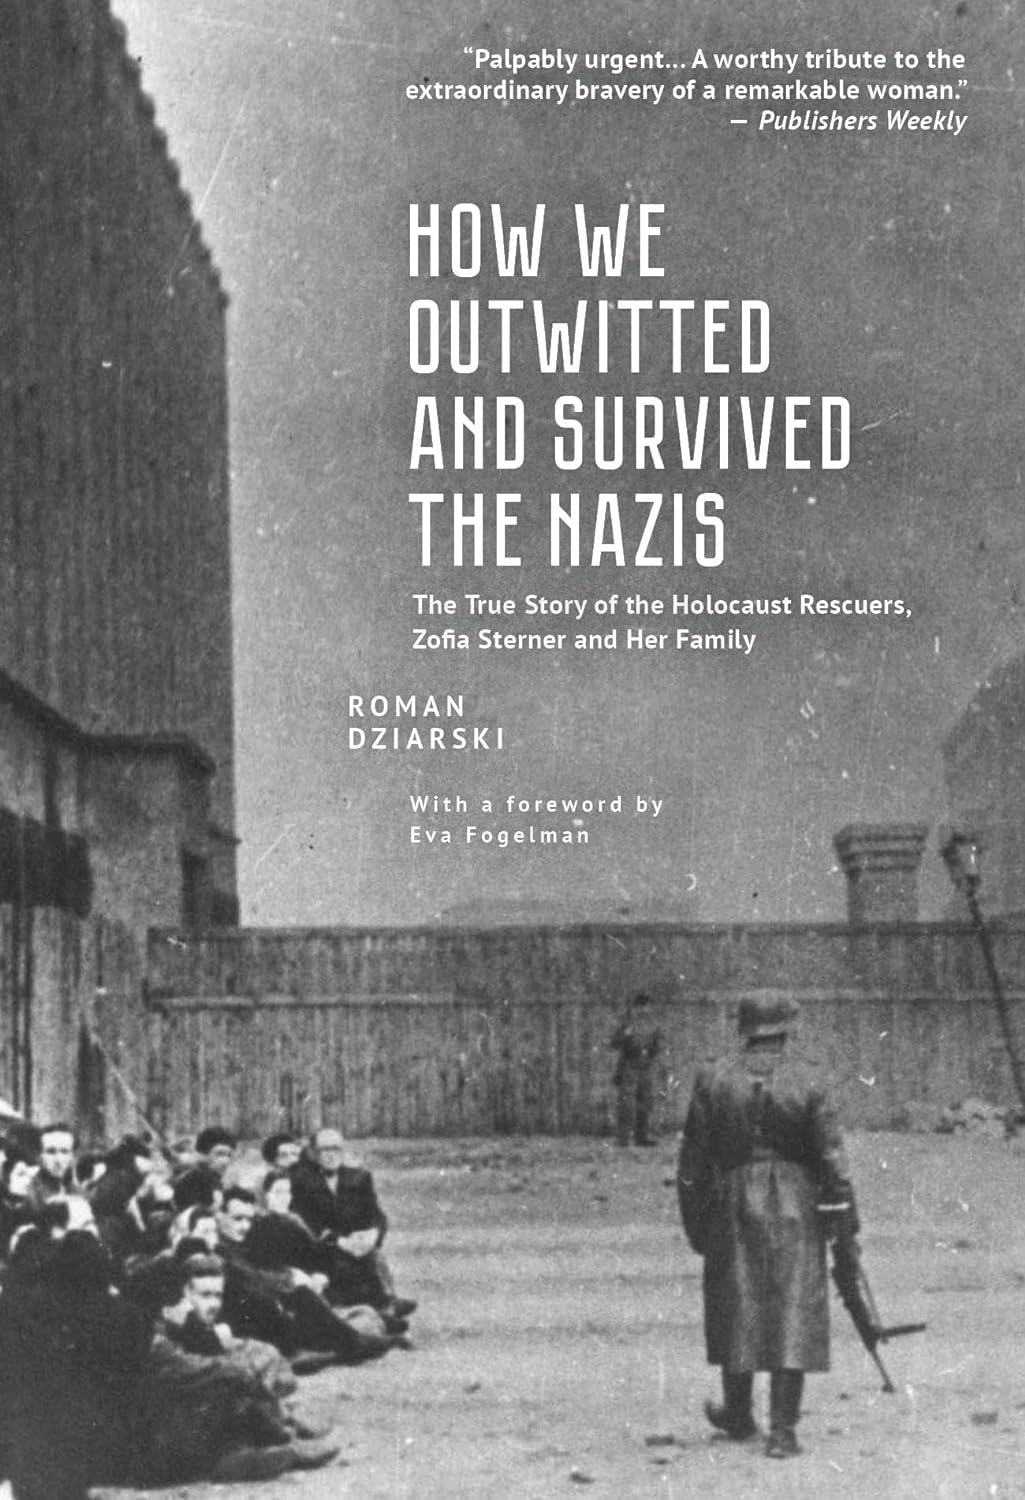 How We Outwitted and Survived the Nazis: The True Story of the Holocaust Rescuers, Zofia Sterner and Her Family